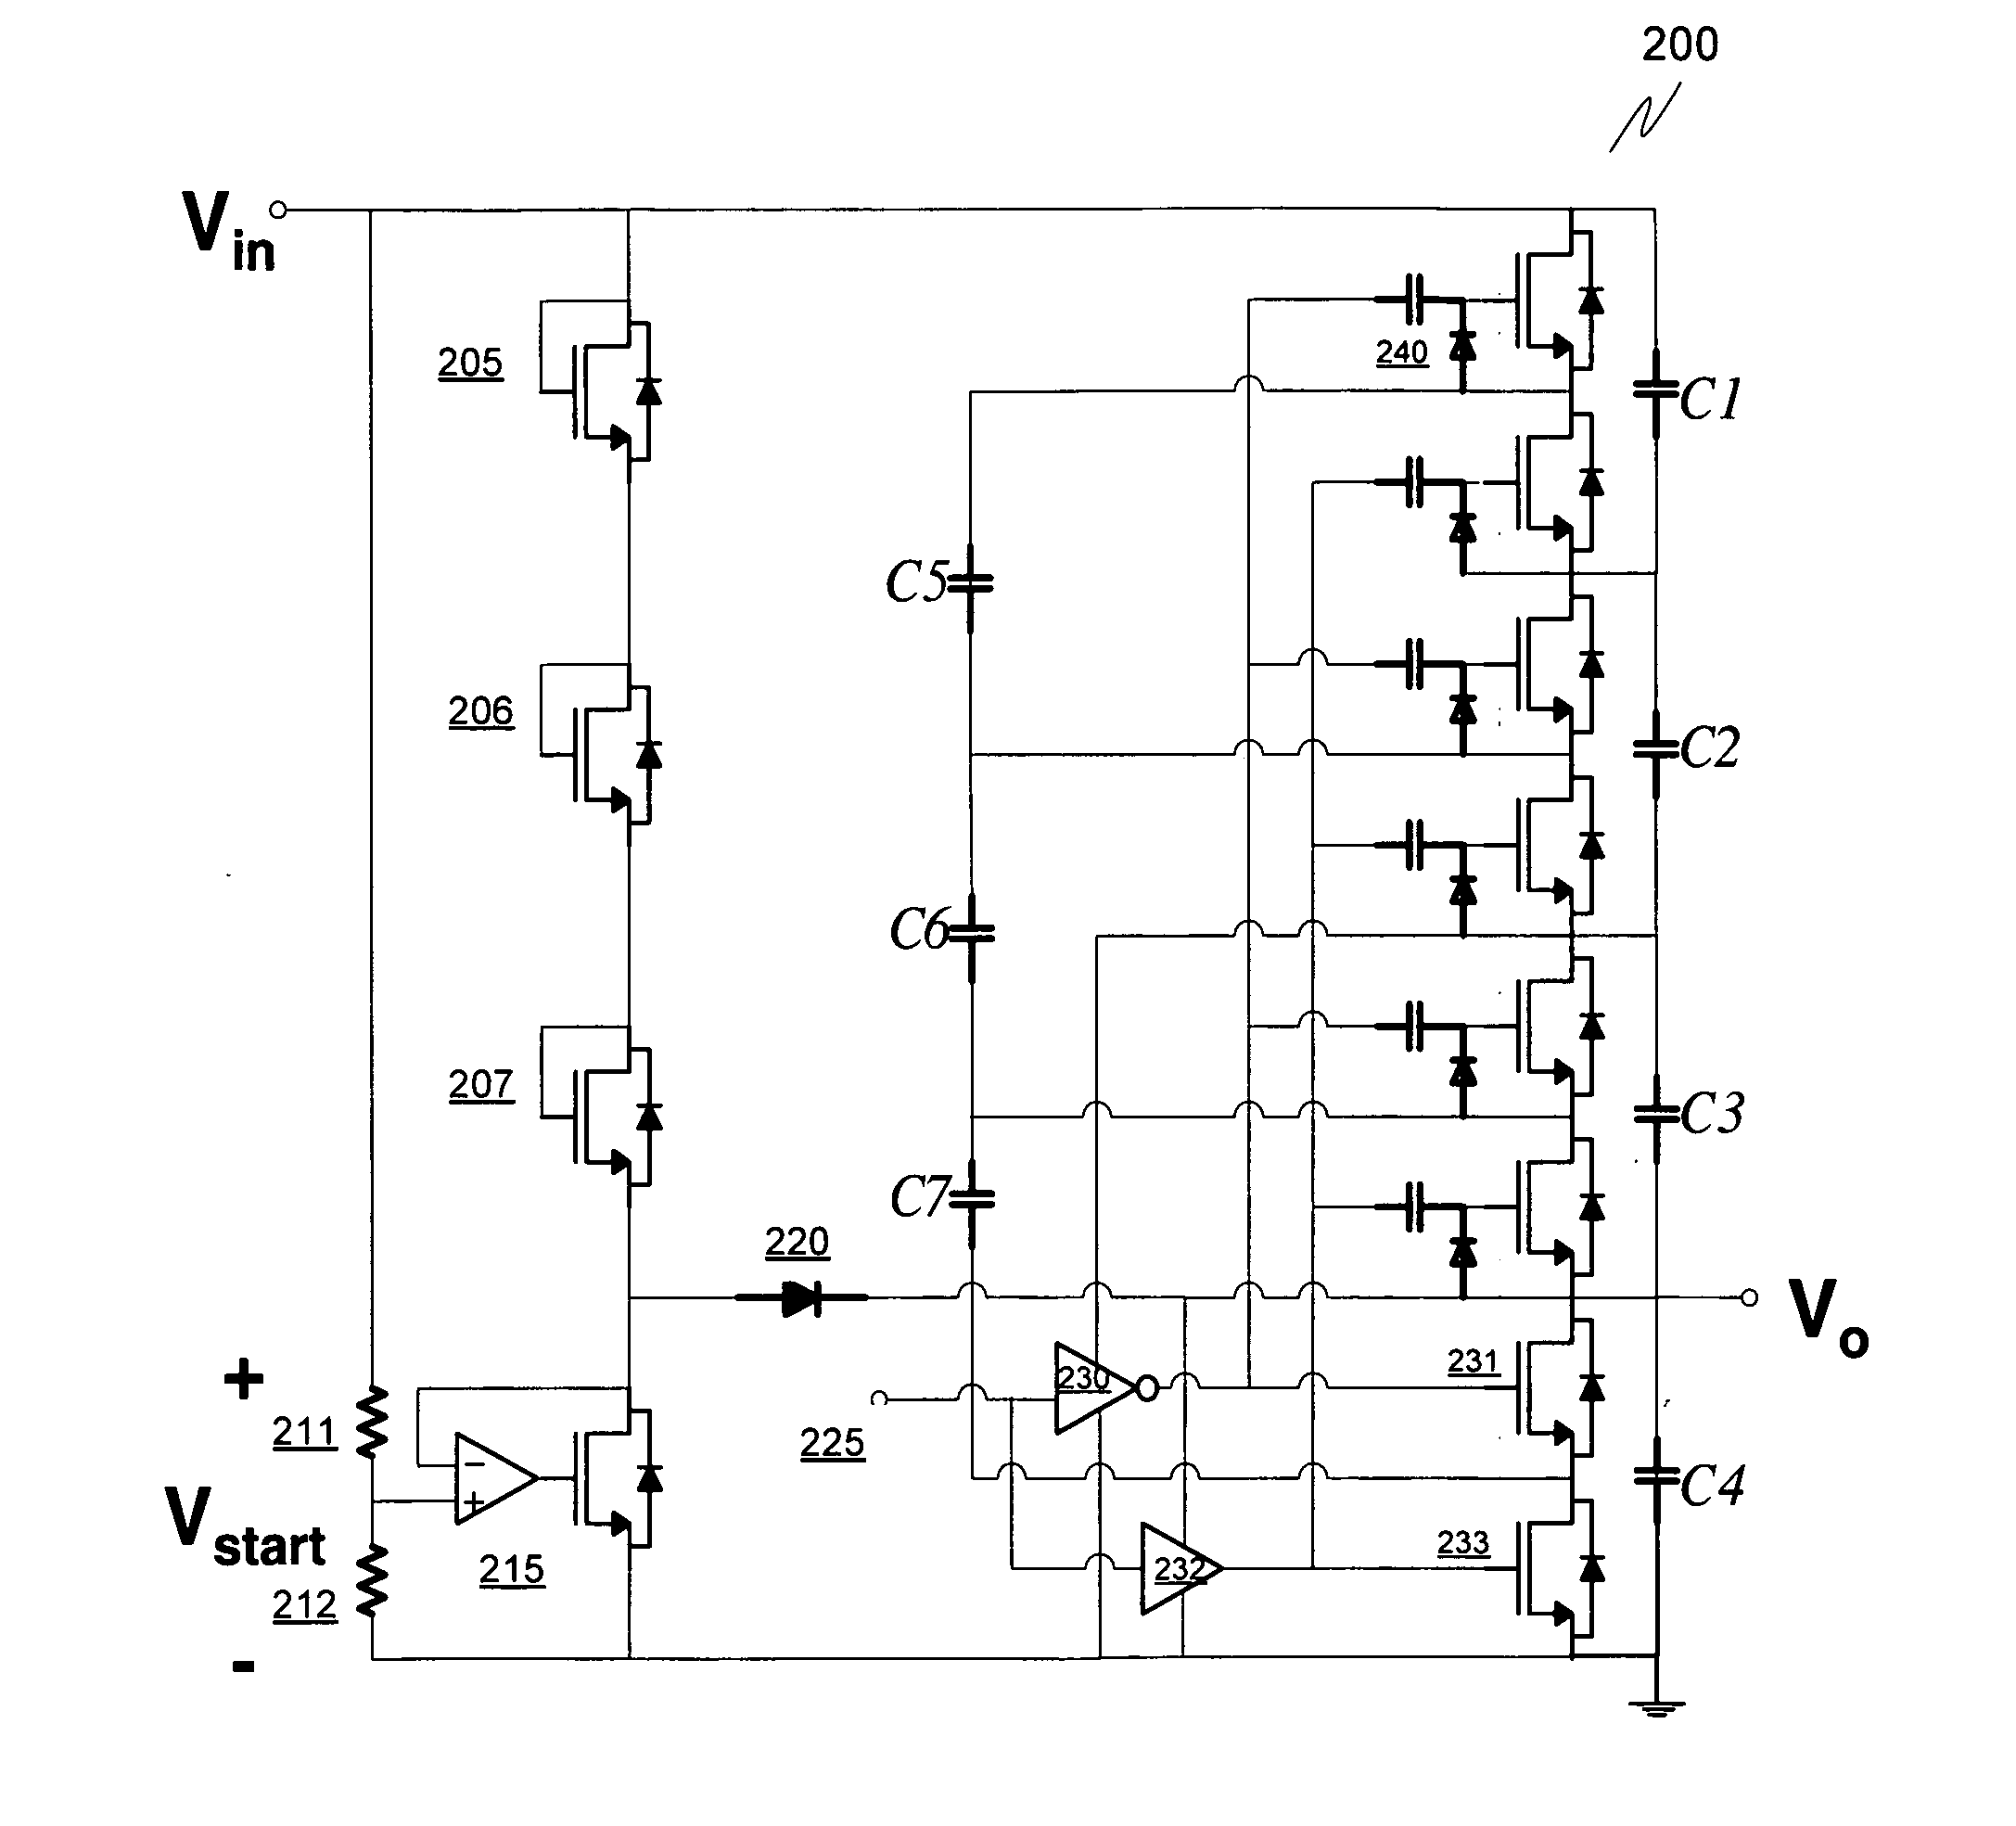 Drive and startup for a switched capacitor divider